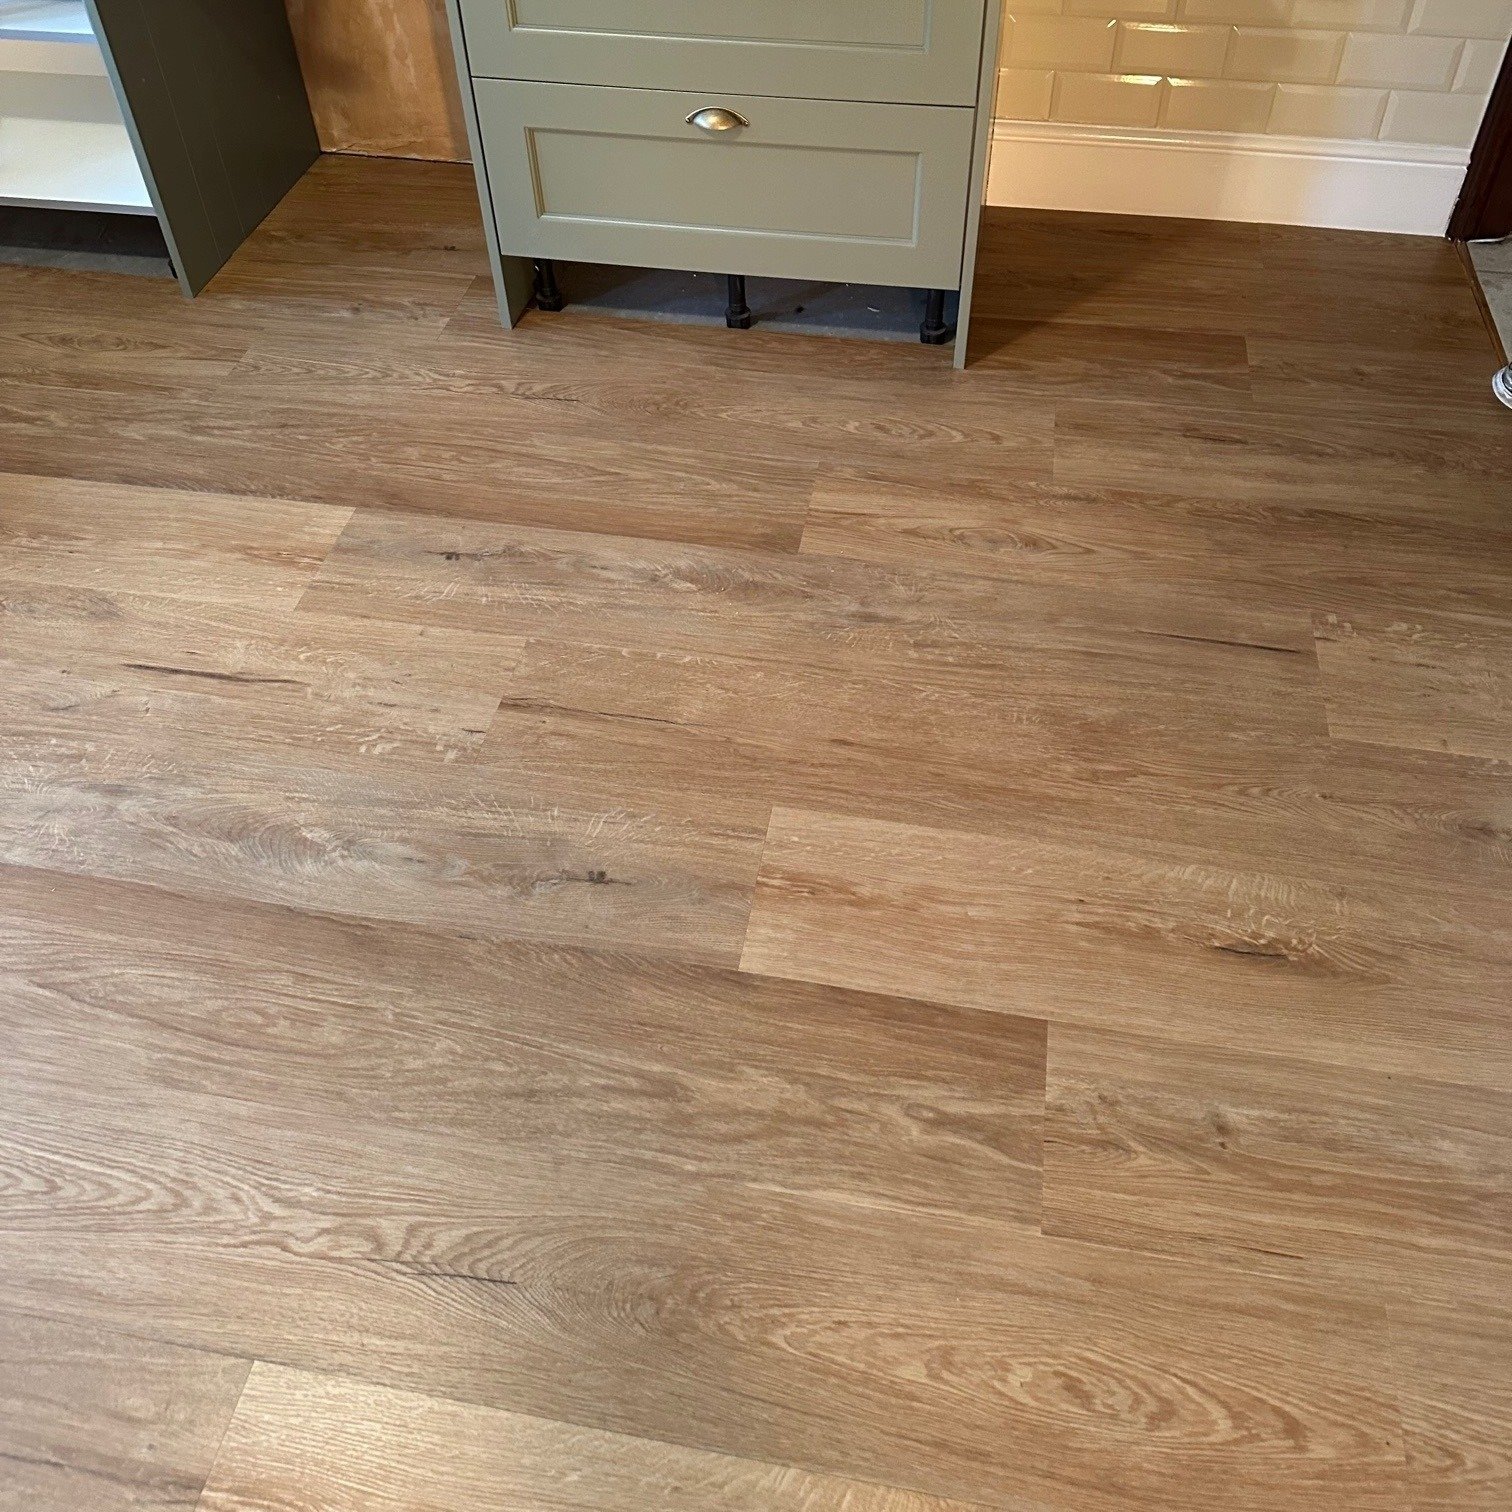 📸 Van Gogh | Croftmore Oak VGW8240 Fitted by us last week! 👌

Developed from floorboards from an old railway station tucked away in the Highlands of Scotland, Croftmore Oak features subtle variation with its lighter brown tones and will suit a vari